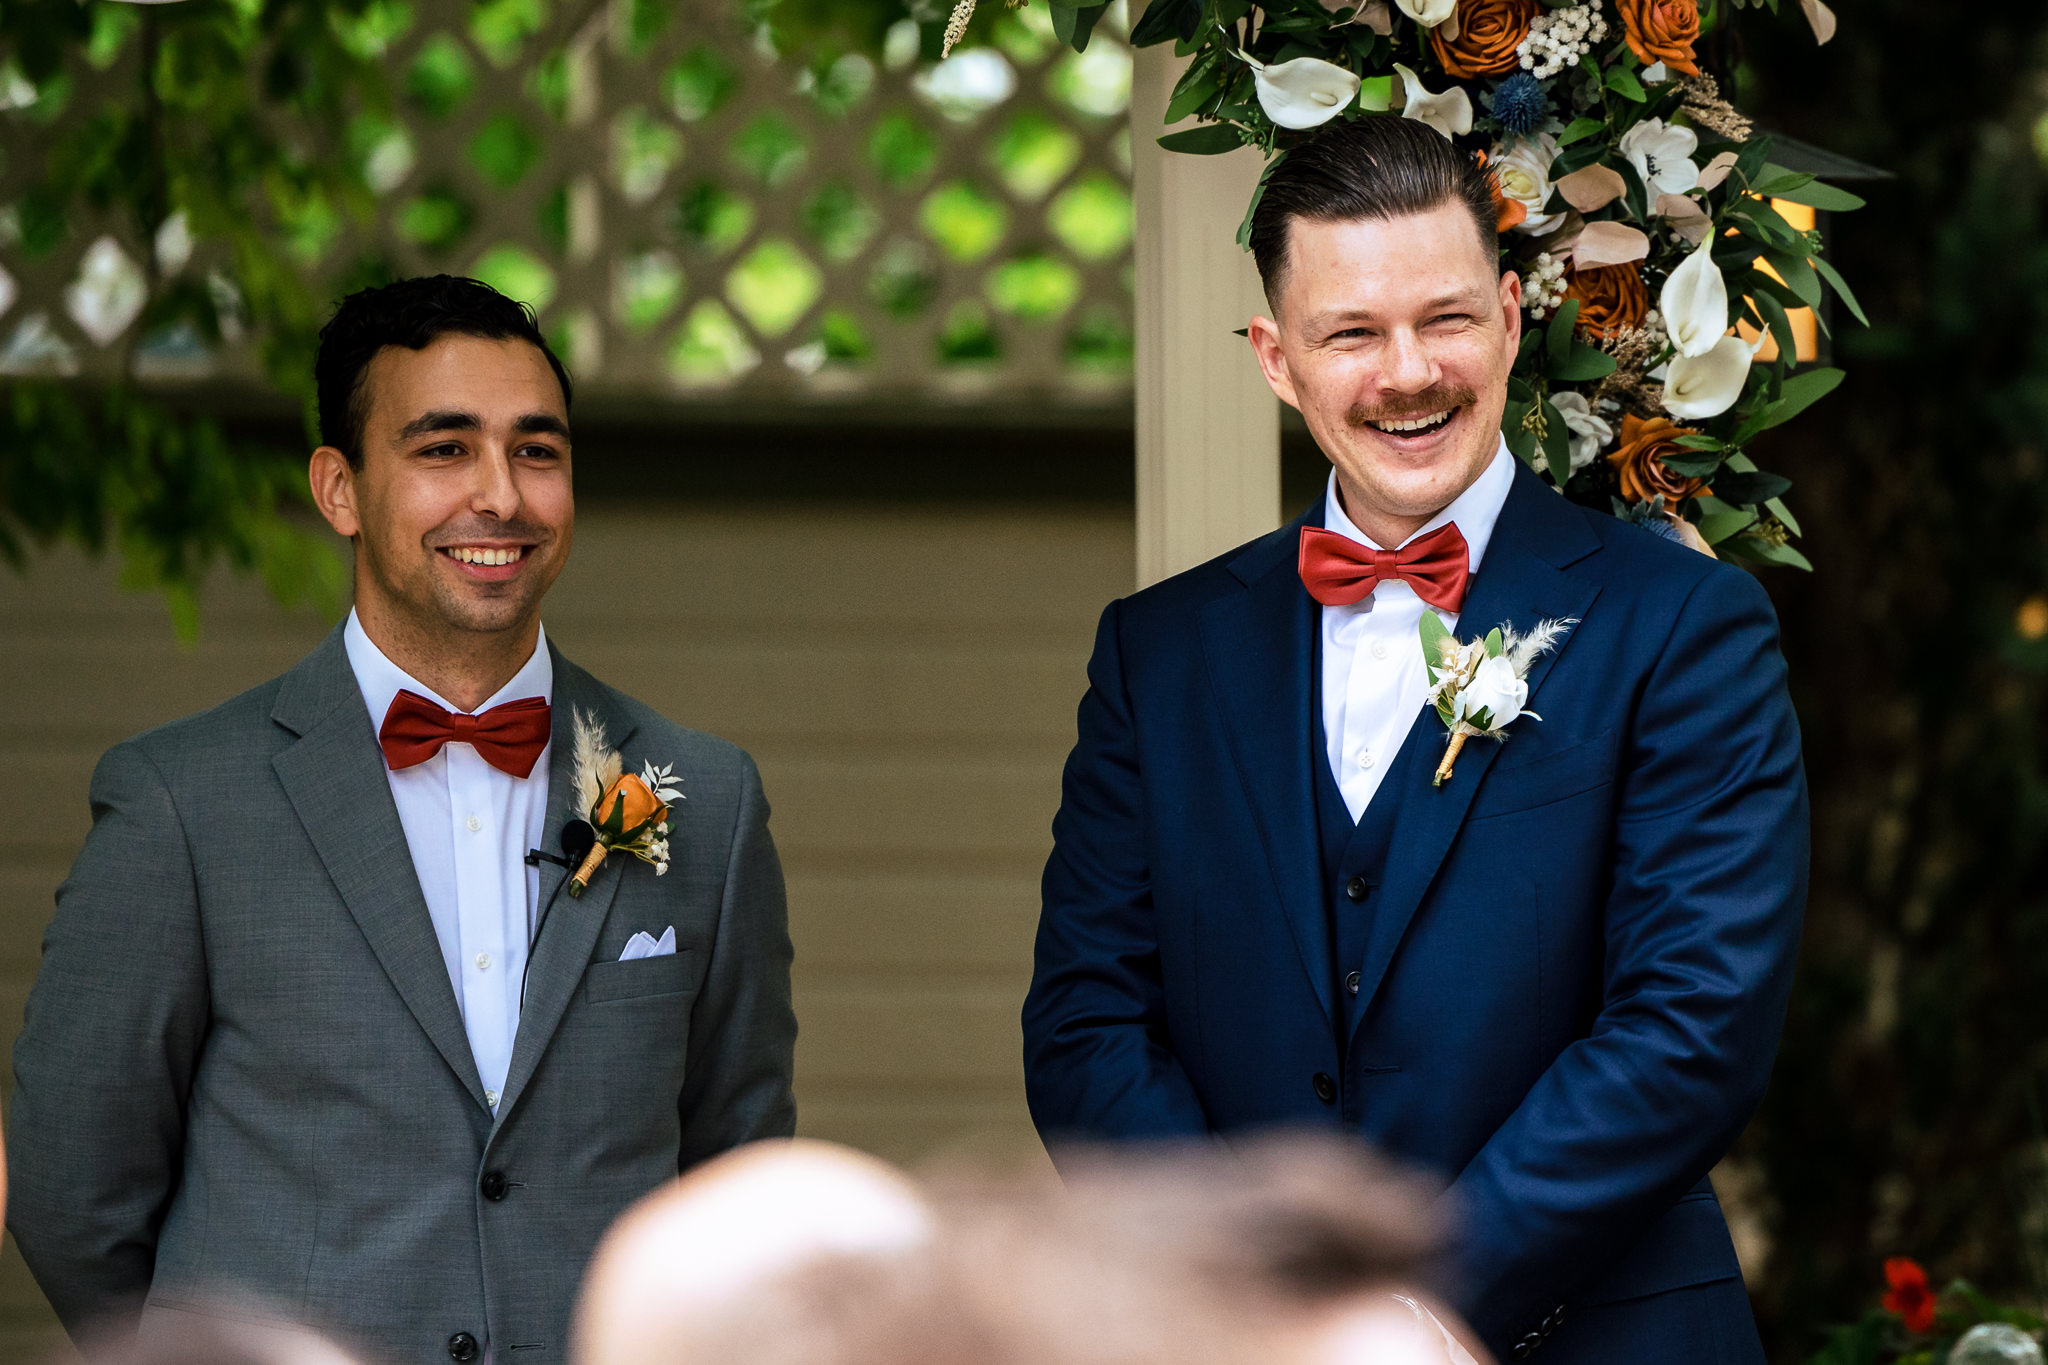 Groom reacting to seeing his Bride walking down the aisle for Haley & Gytenis' Summer Wedding at The McCreery House by Colorado Wedding Photographer, Jennifer Garza.